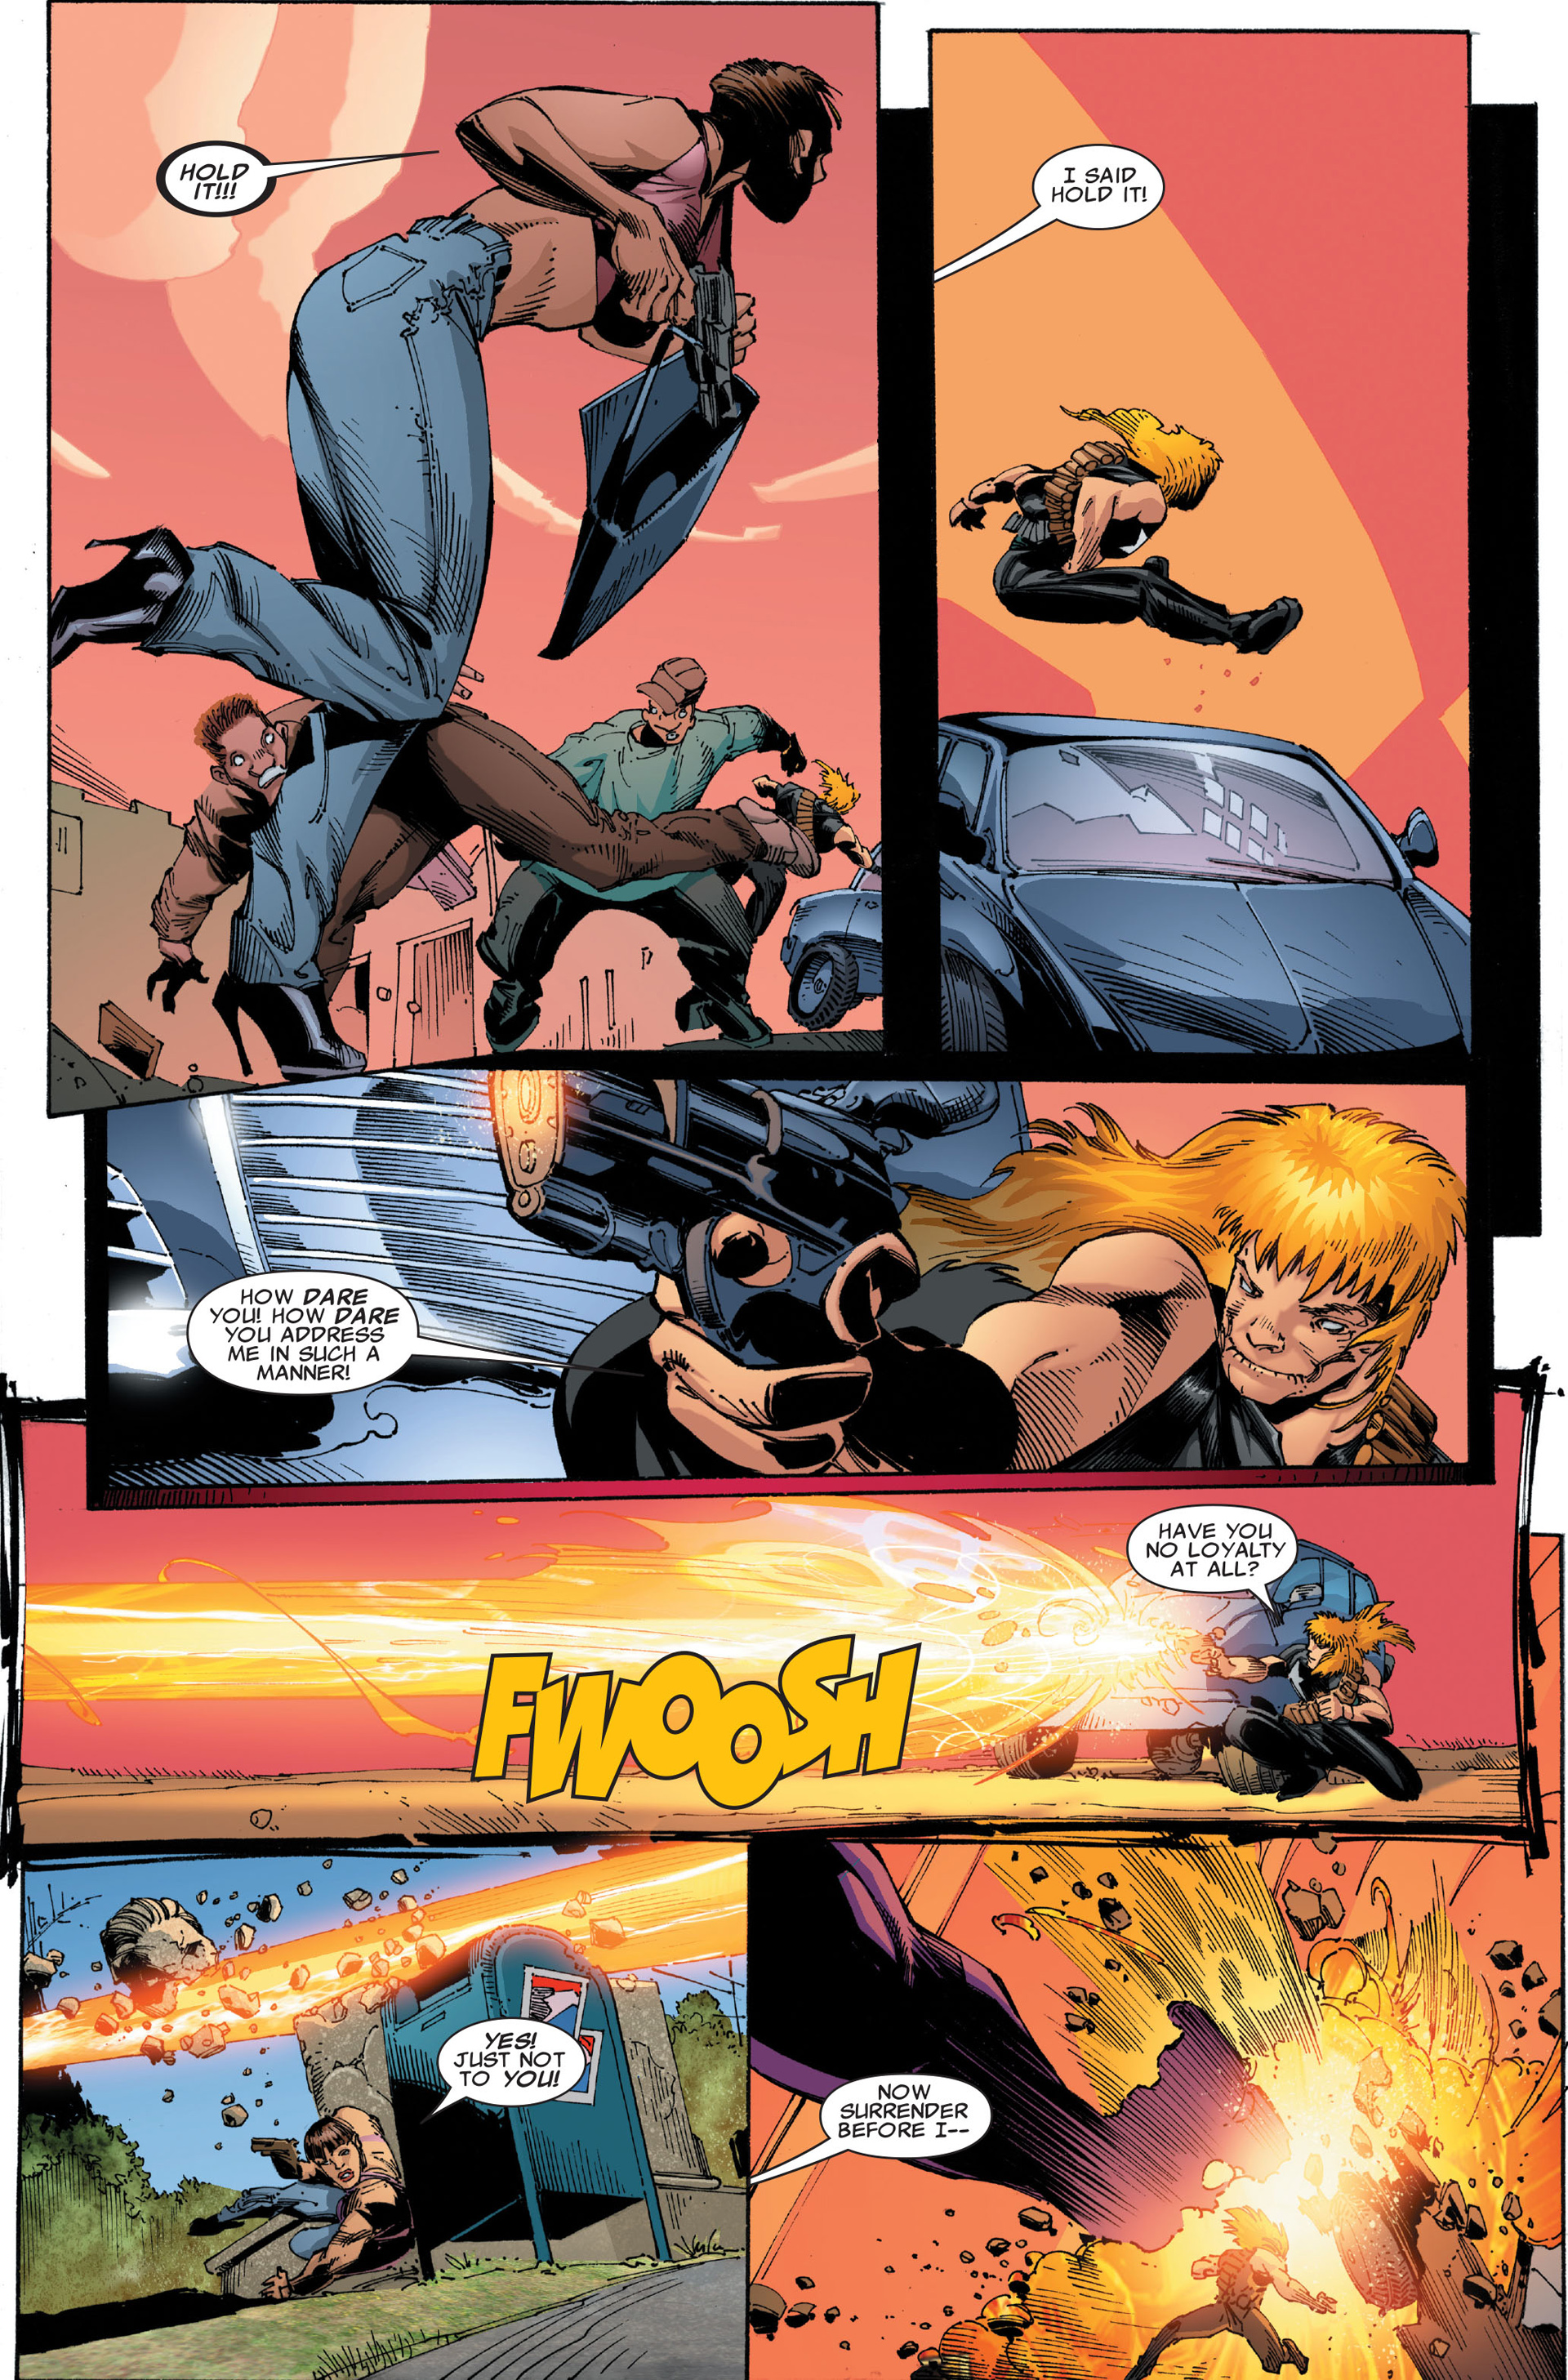 X-Factor (2006) 33 Page 22